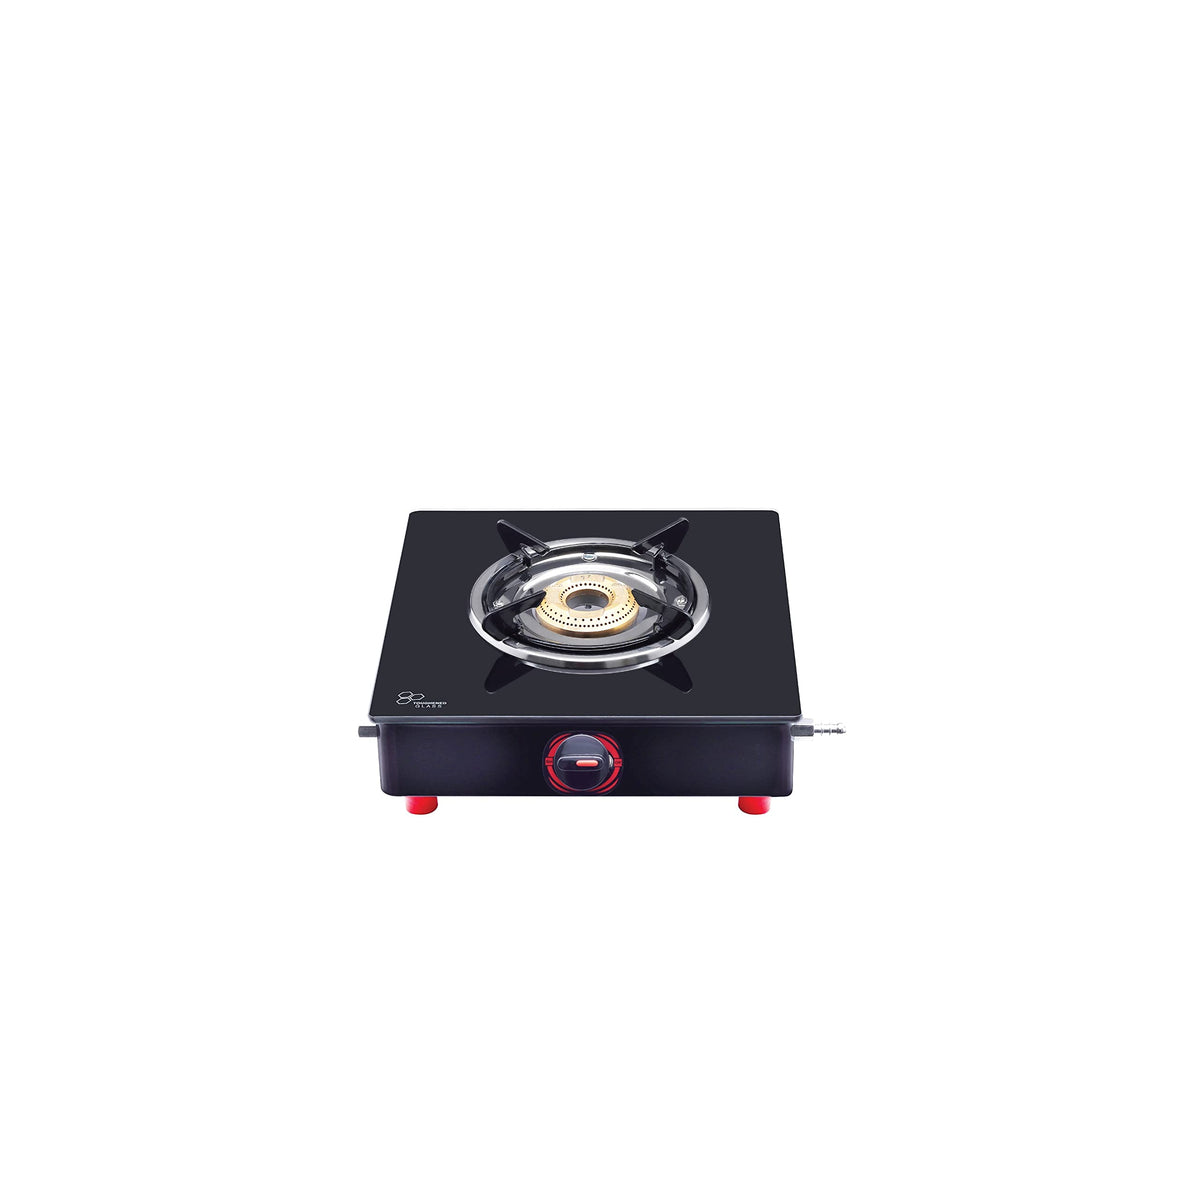 Surya Flame Smart Gas Stove, 4 Burner Glass Top, India's First ISI Certifed Black Body PNG Stove with Jumbo Burner, Direct use for Pipeline Gas - 2 Years Complete Doorstep Warranty